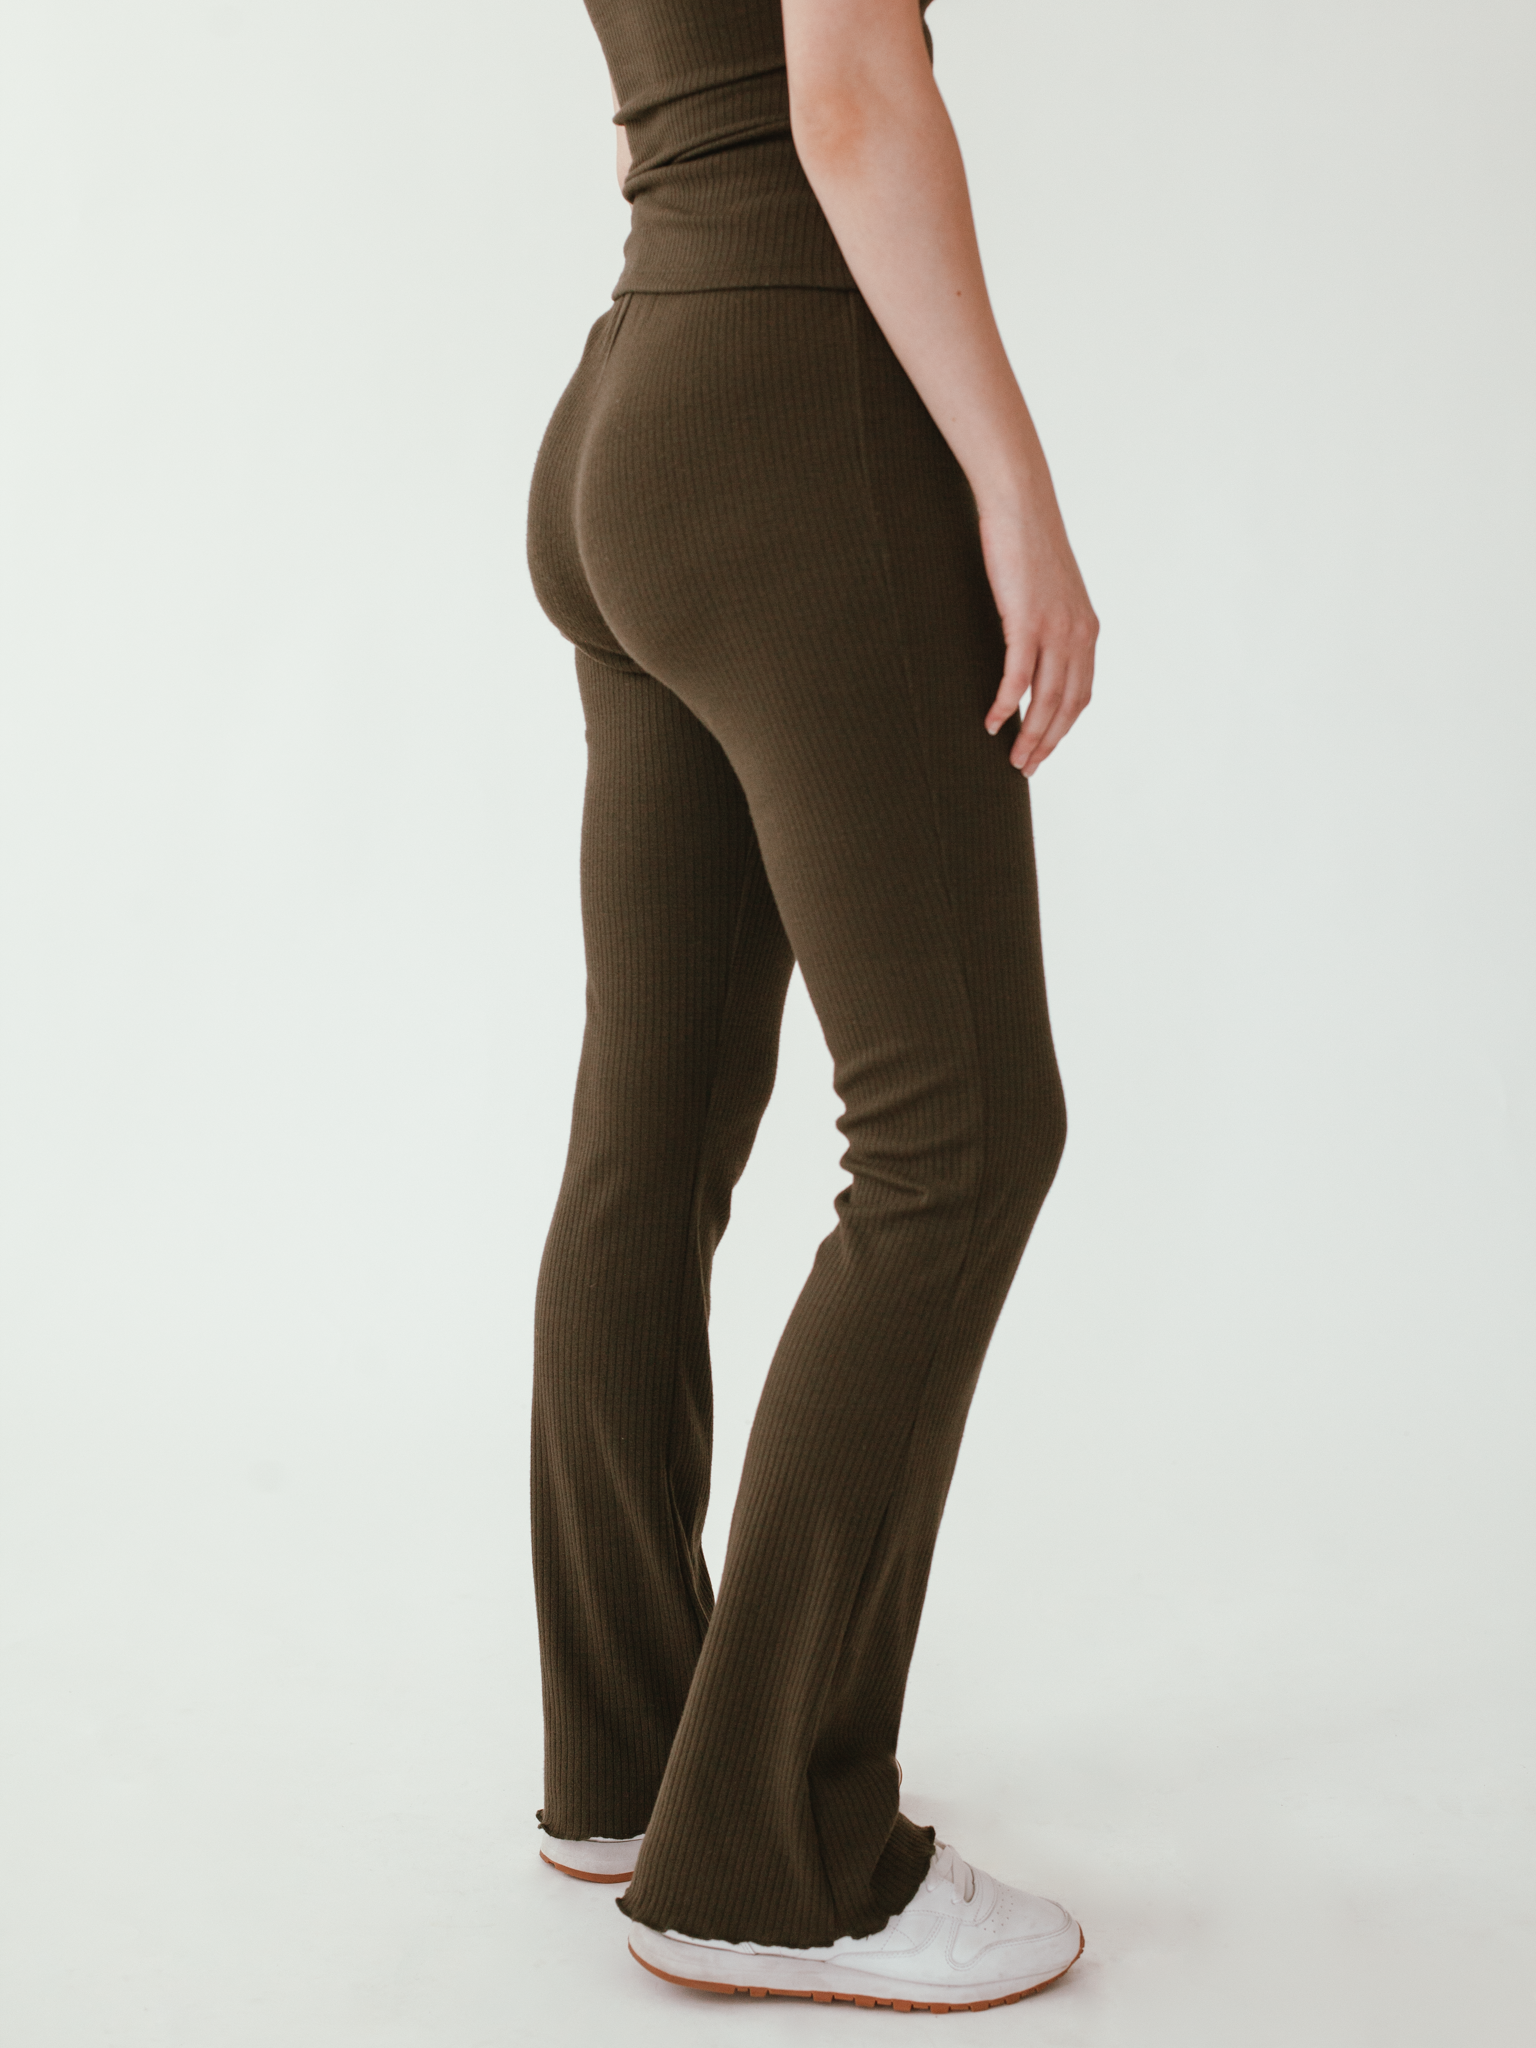 Ribbed Knit Pants in Camel